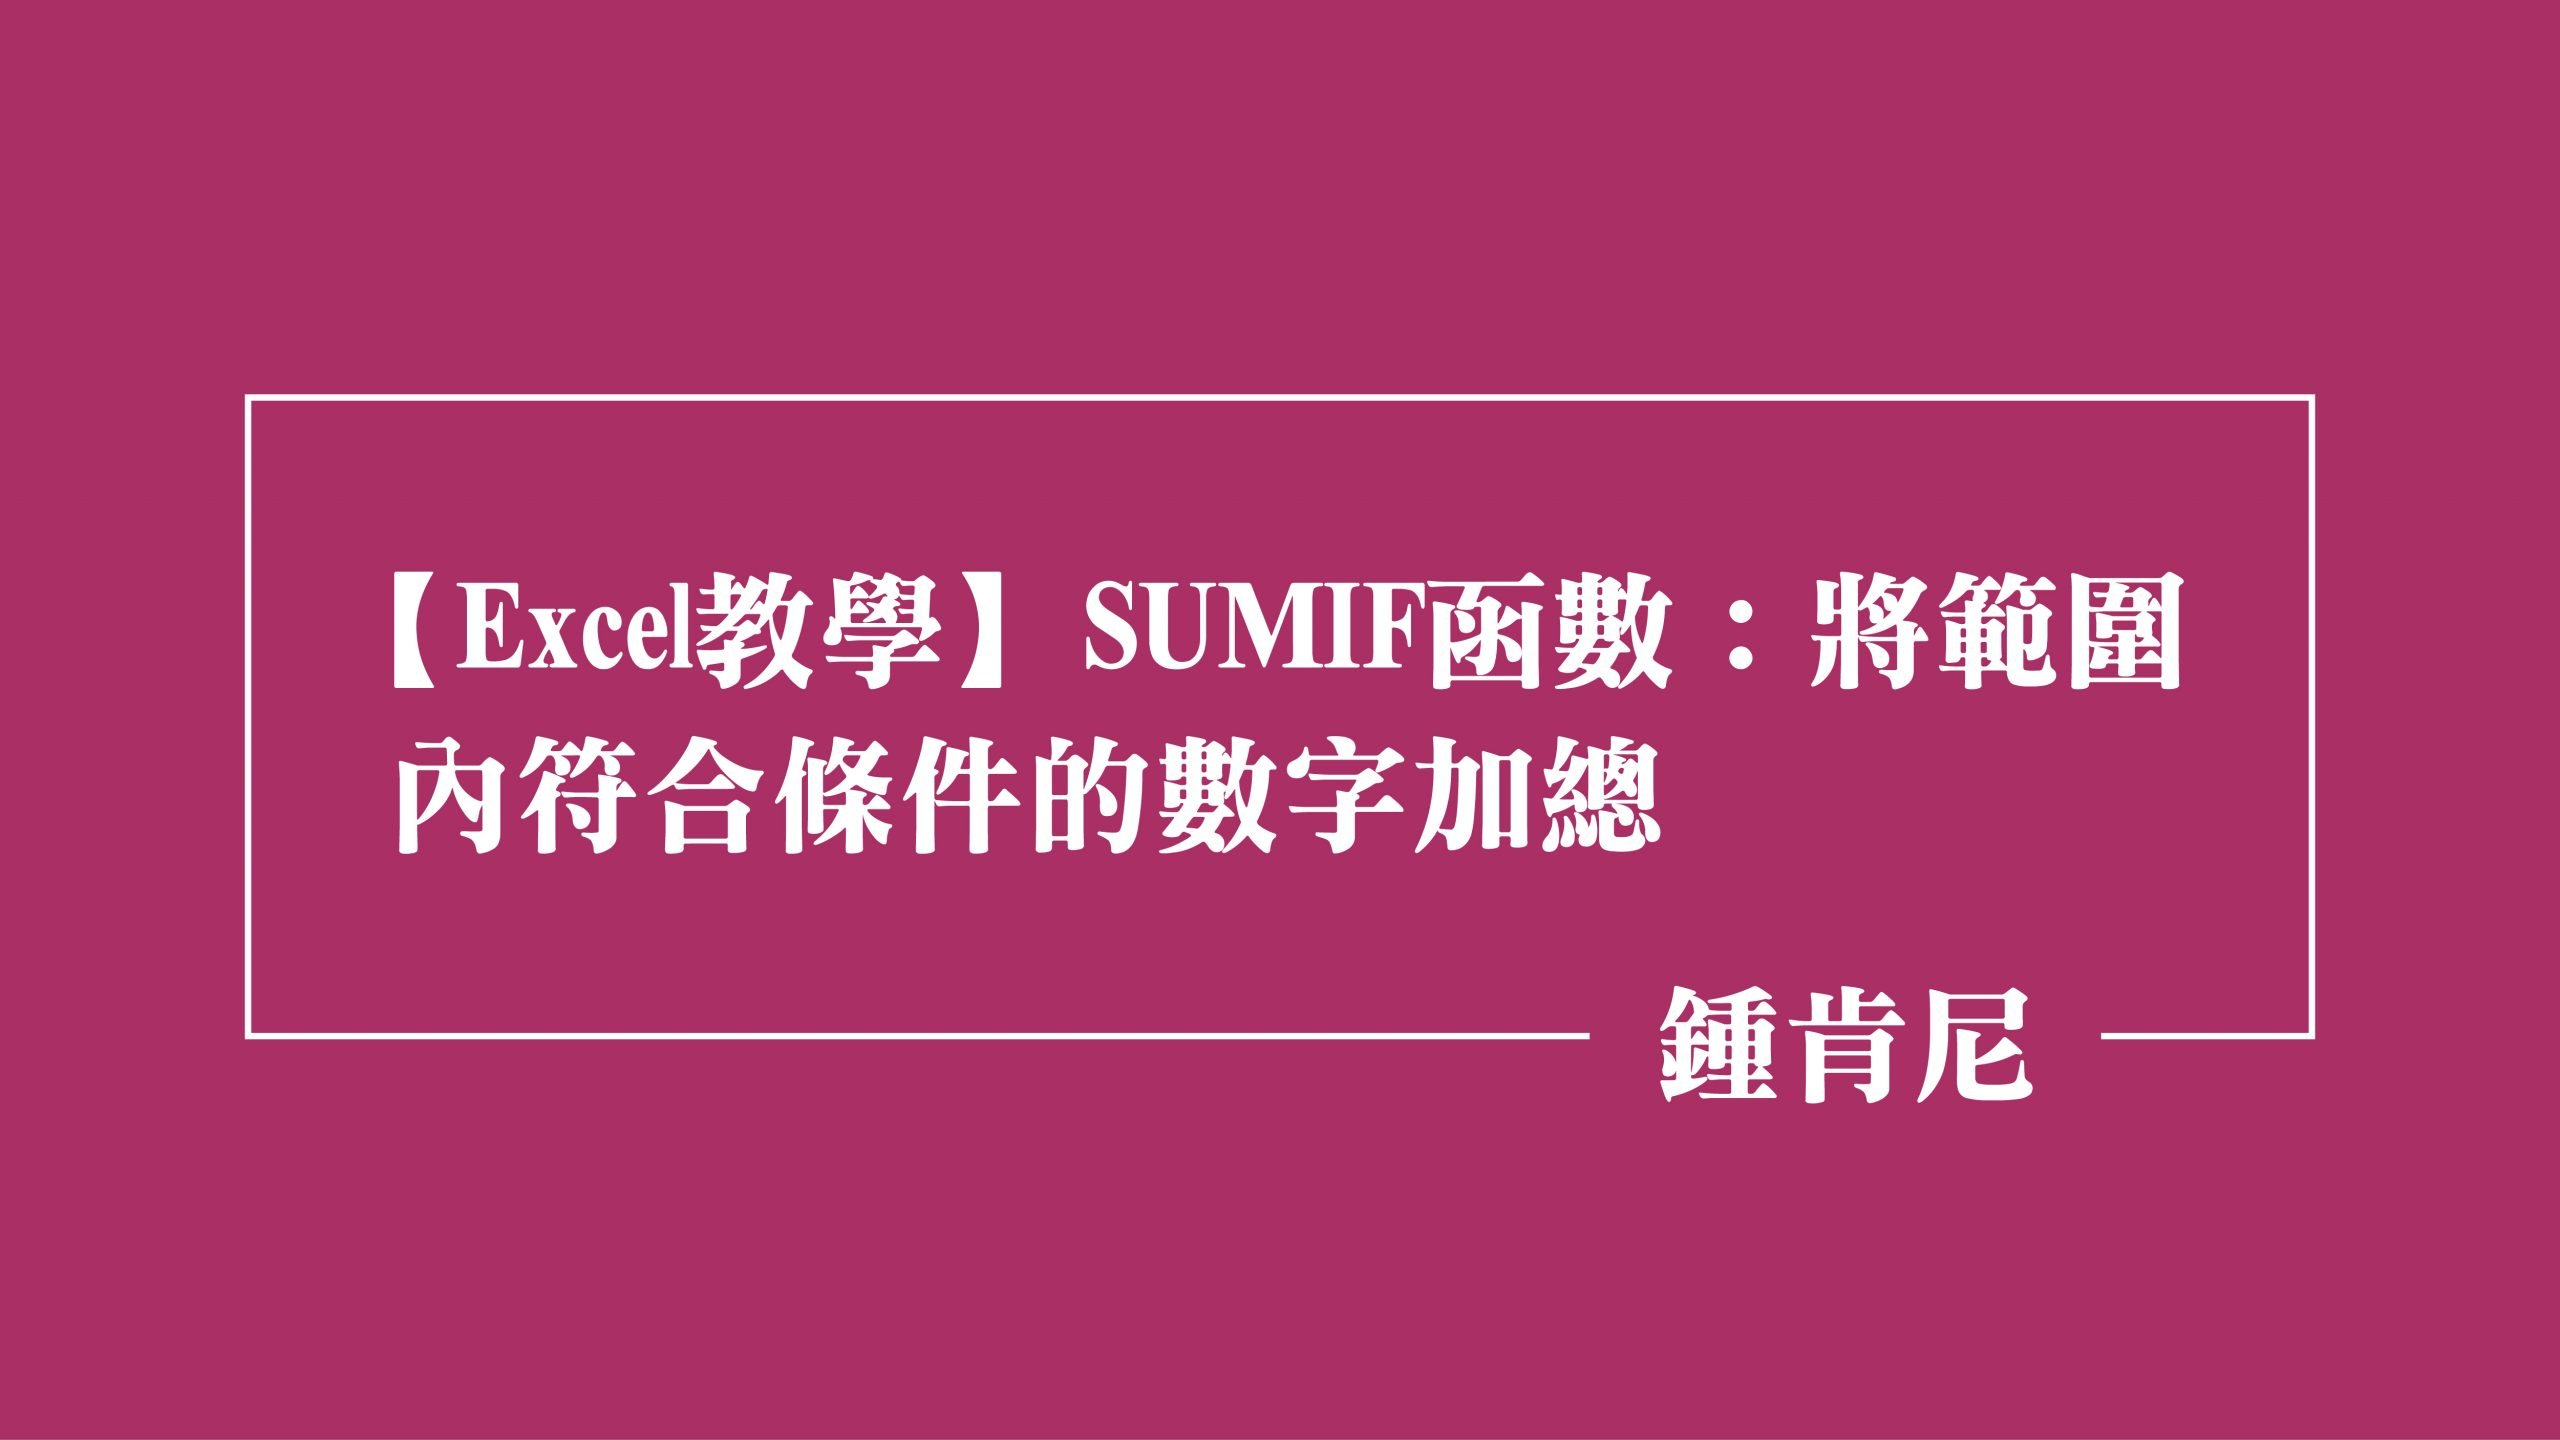 Read more about the article 【Excel教學】SUMIF函數：將範圍內符合條件的數字加總